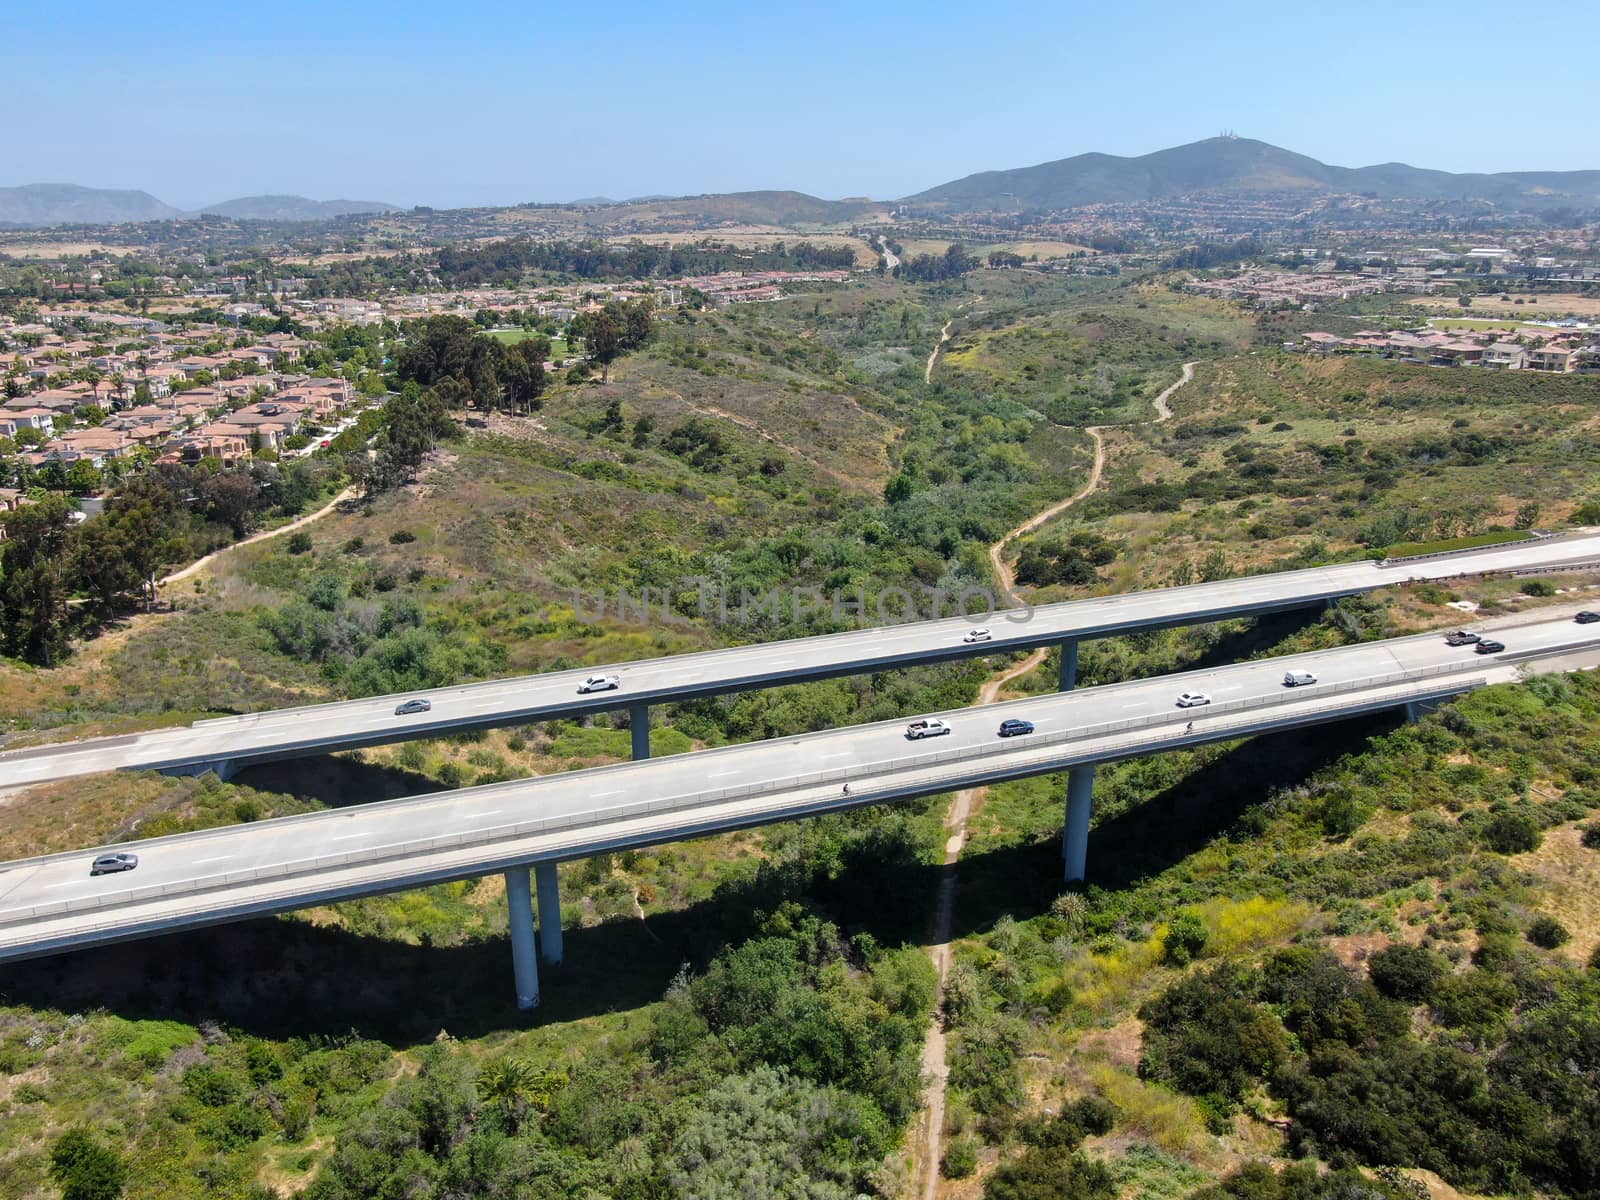 Aerial view of road highway bridge, viaduct supports in the valley among the green hills, transport infrastructure. California, USA 